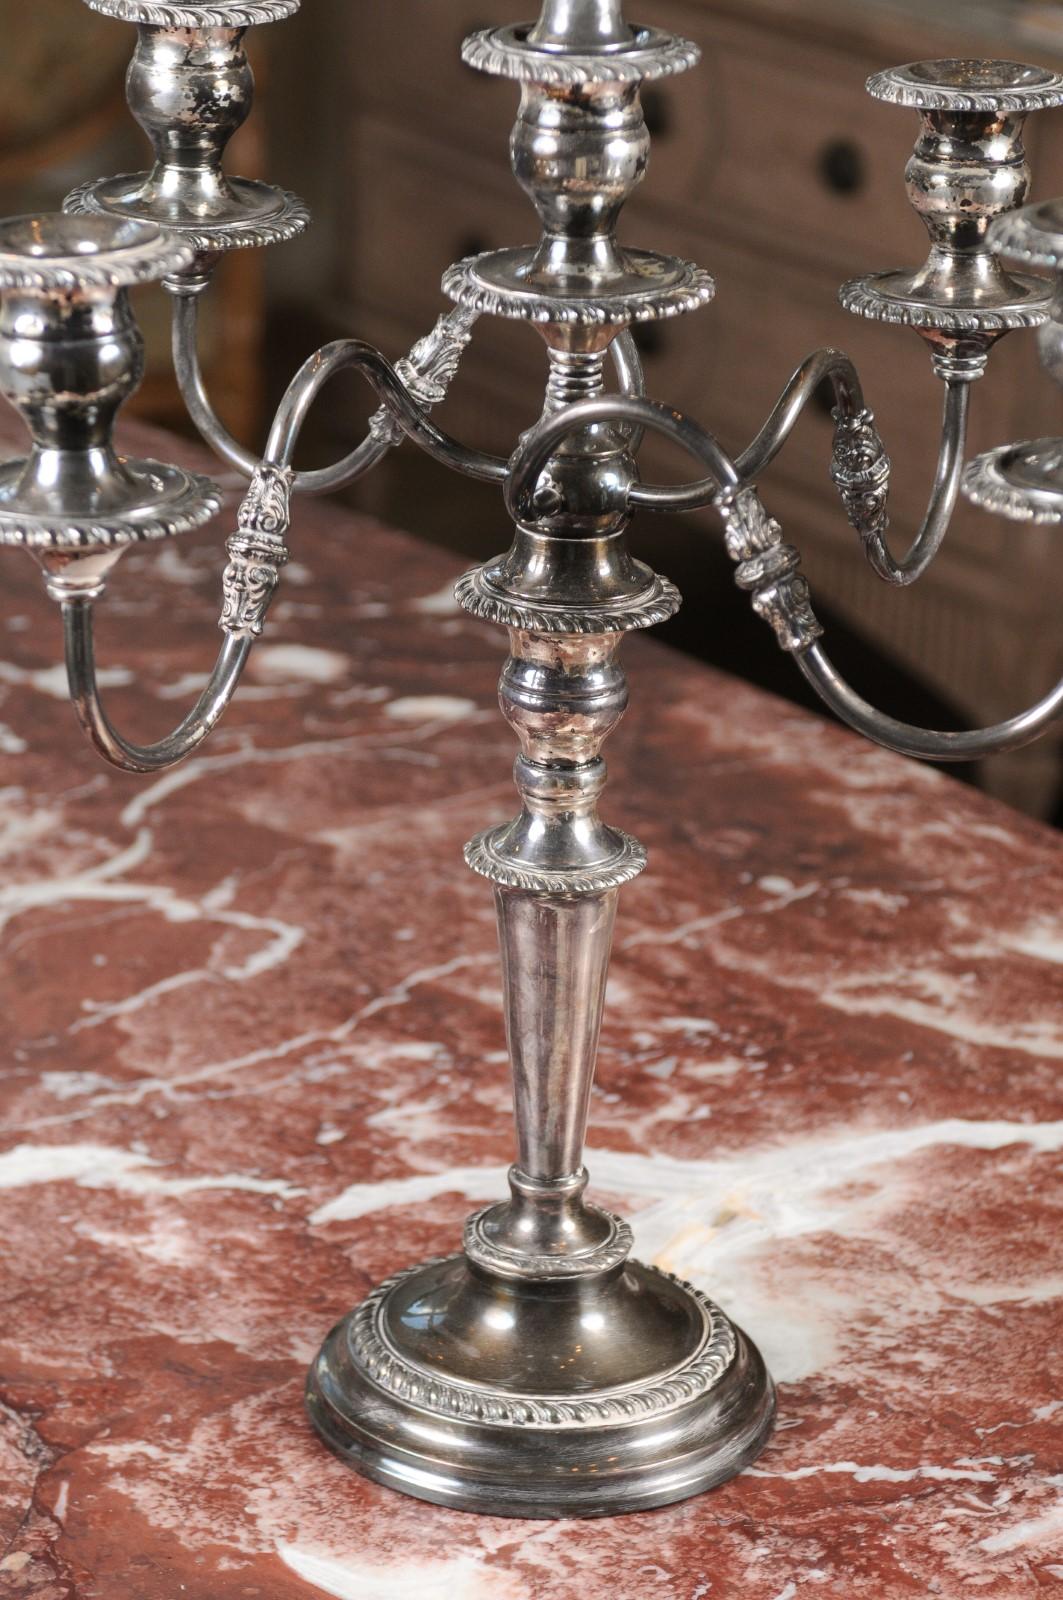 American Silver Plated Four-Arm Candelabra with Foliage and Scrolling Accents 1